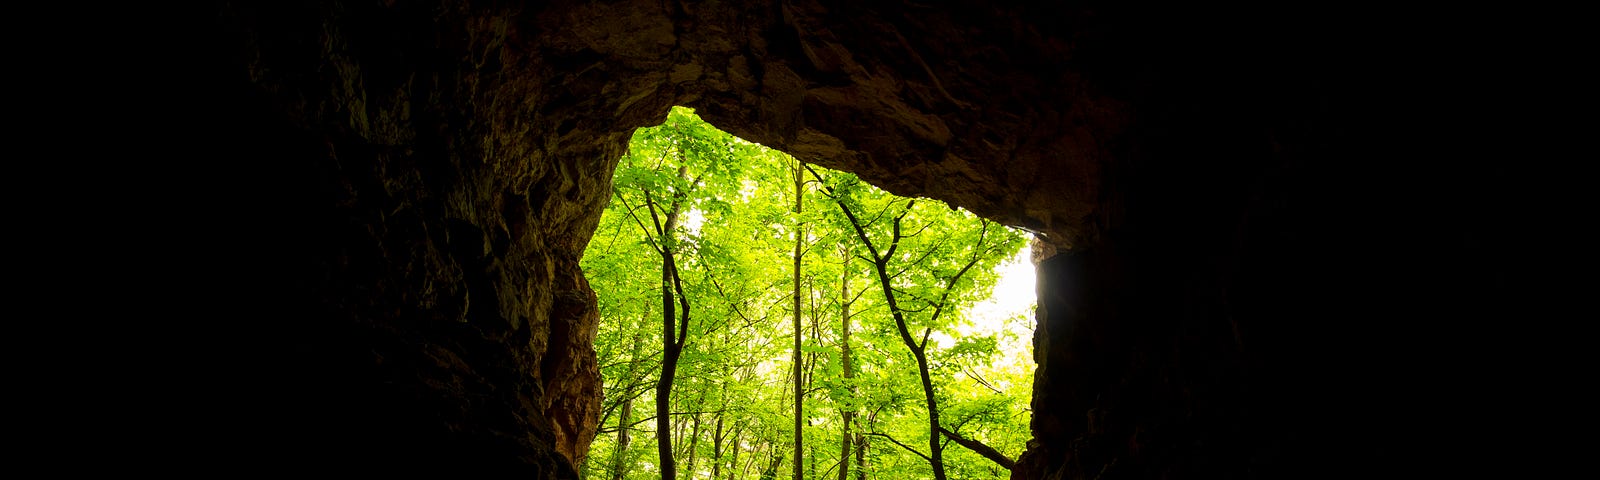 The cave opens on a forest.